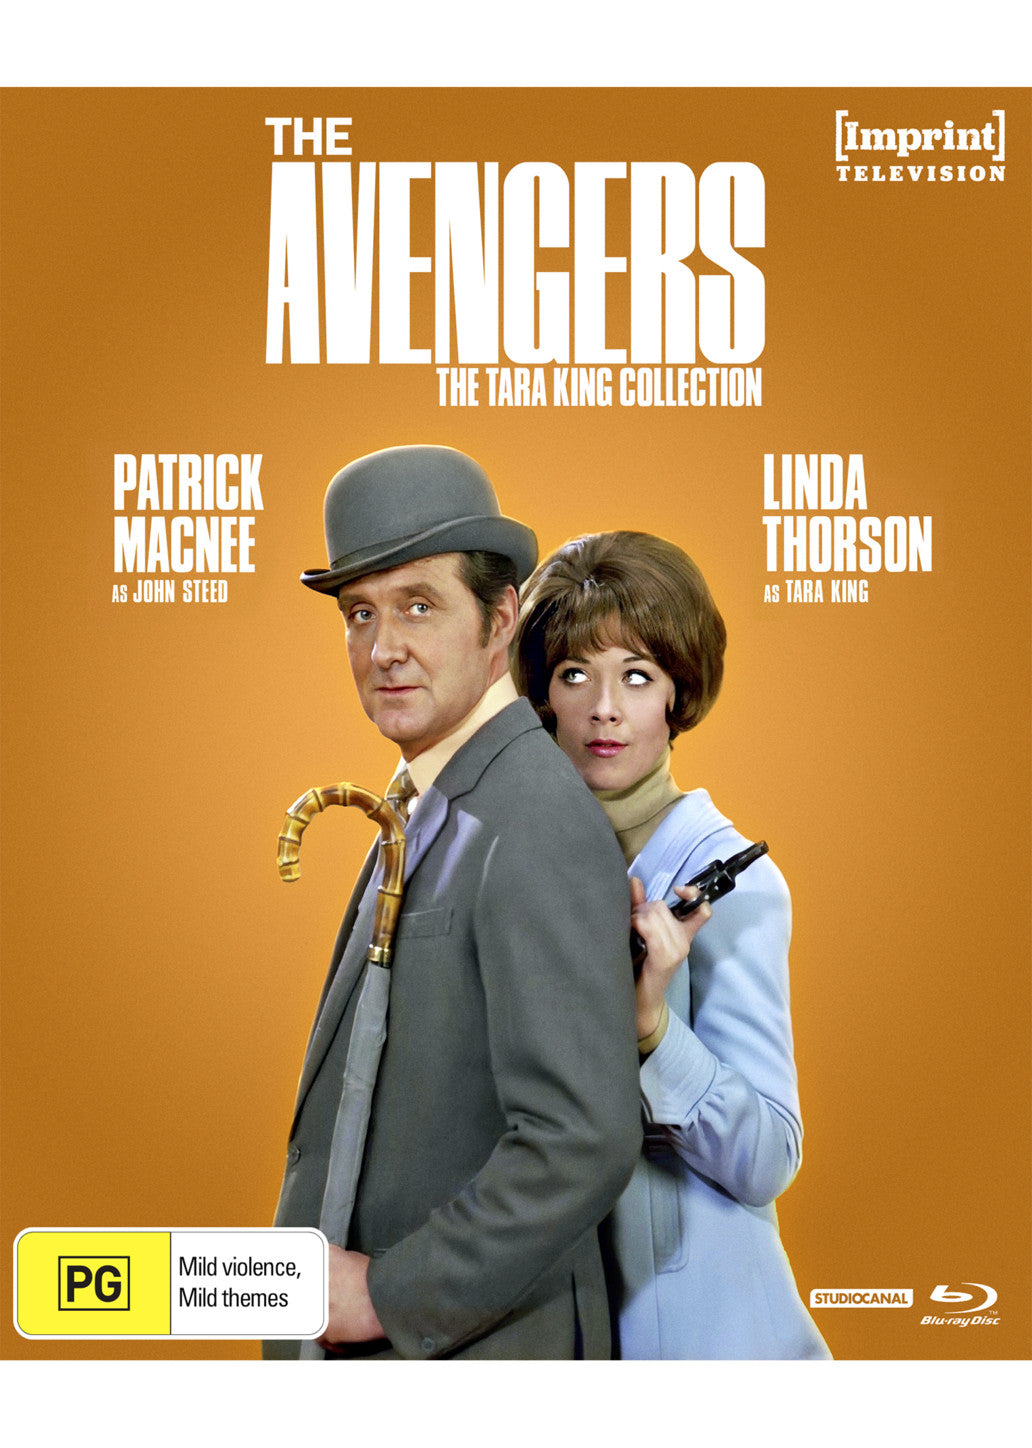 THE AVENGERS: THE TARA KING COLLECTION (IMPRINT TV COLLECTION #4)